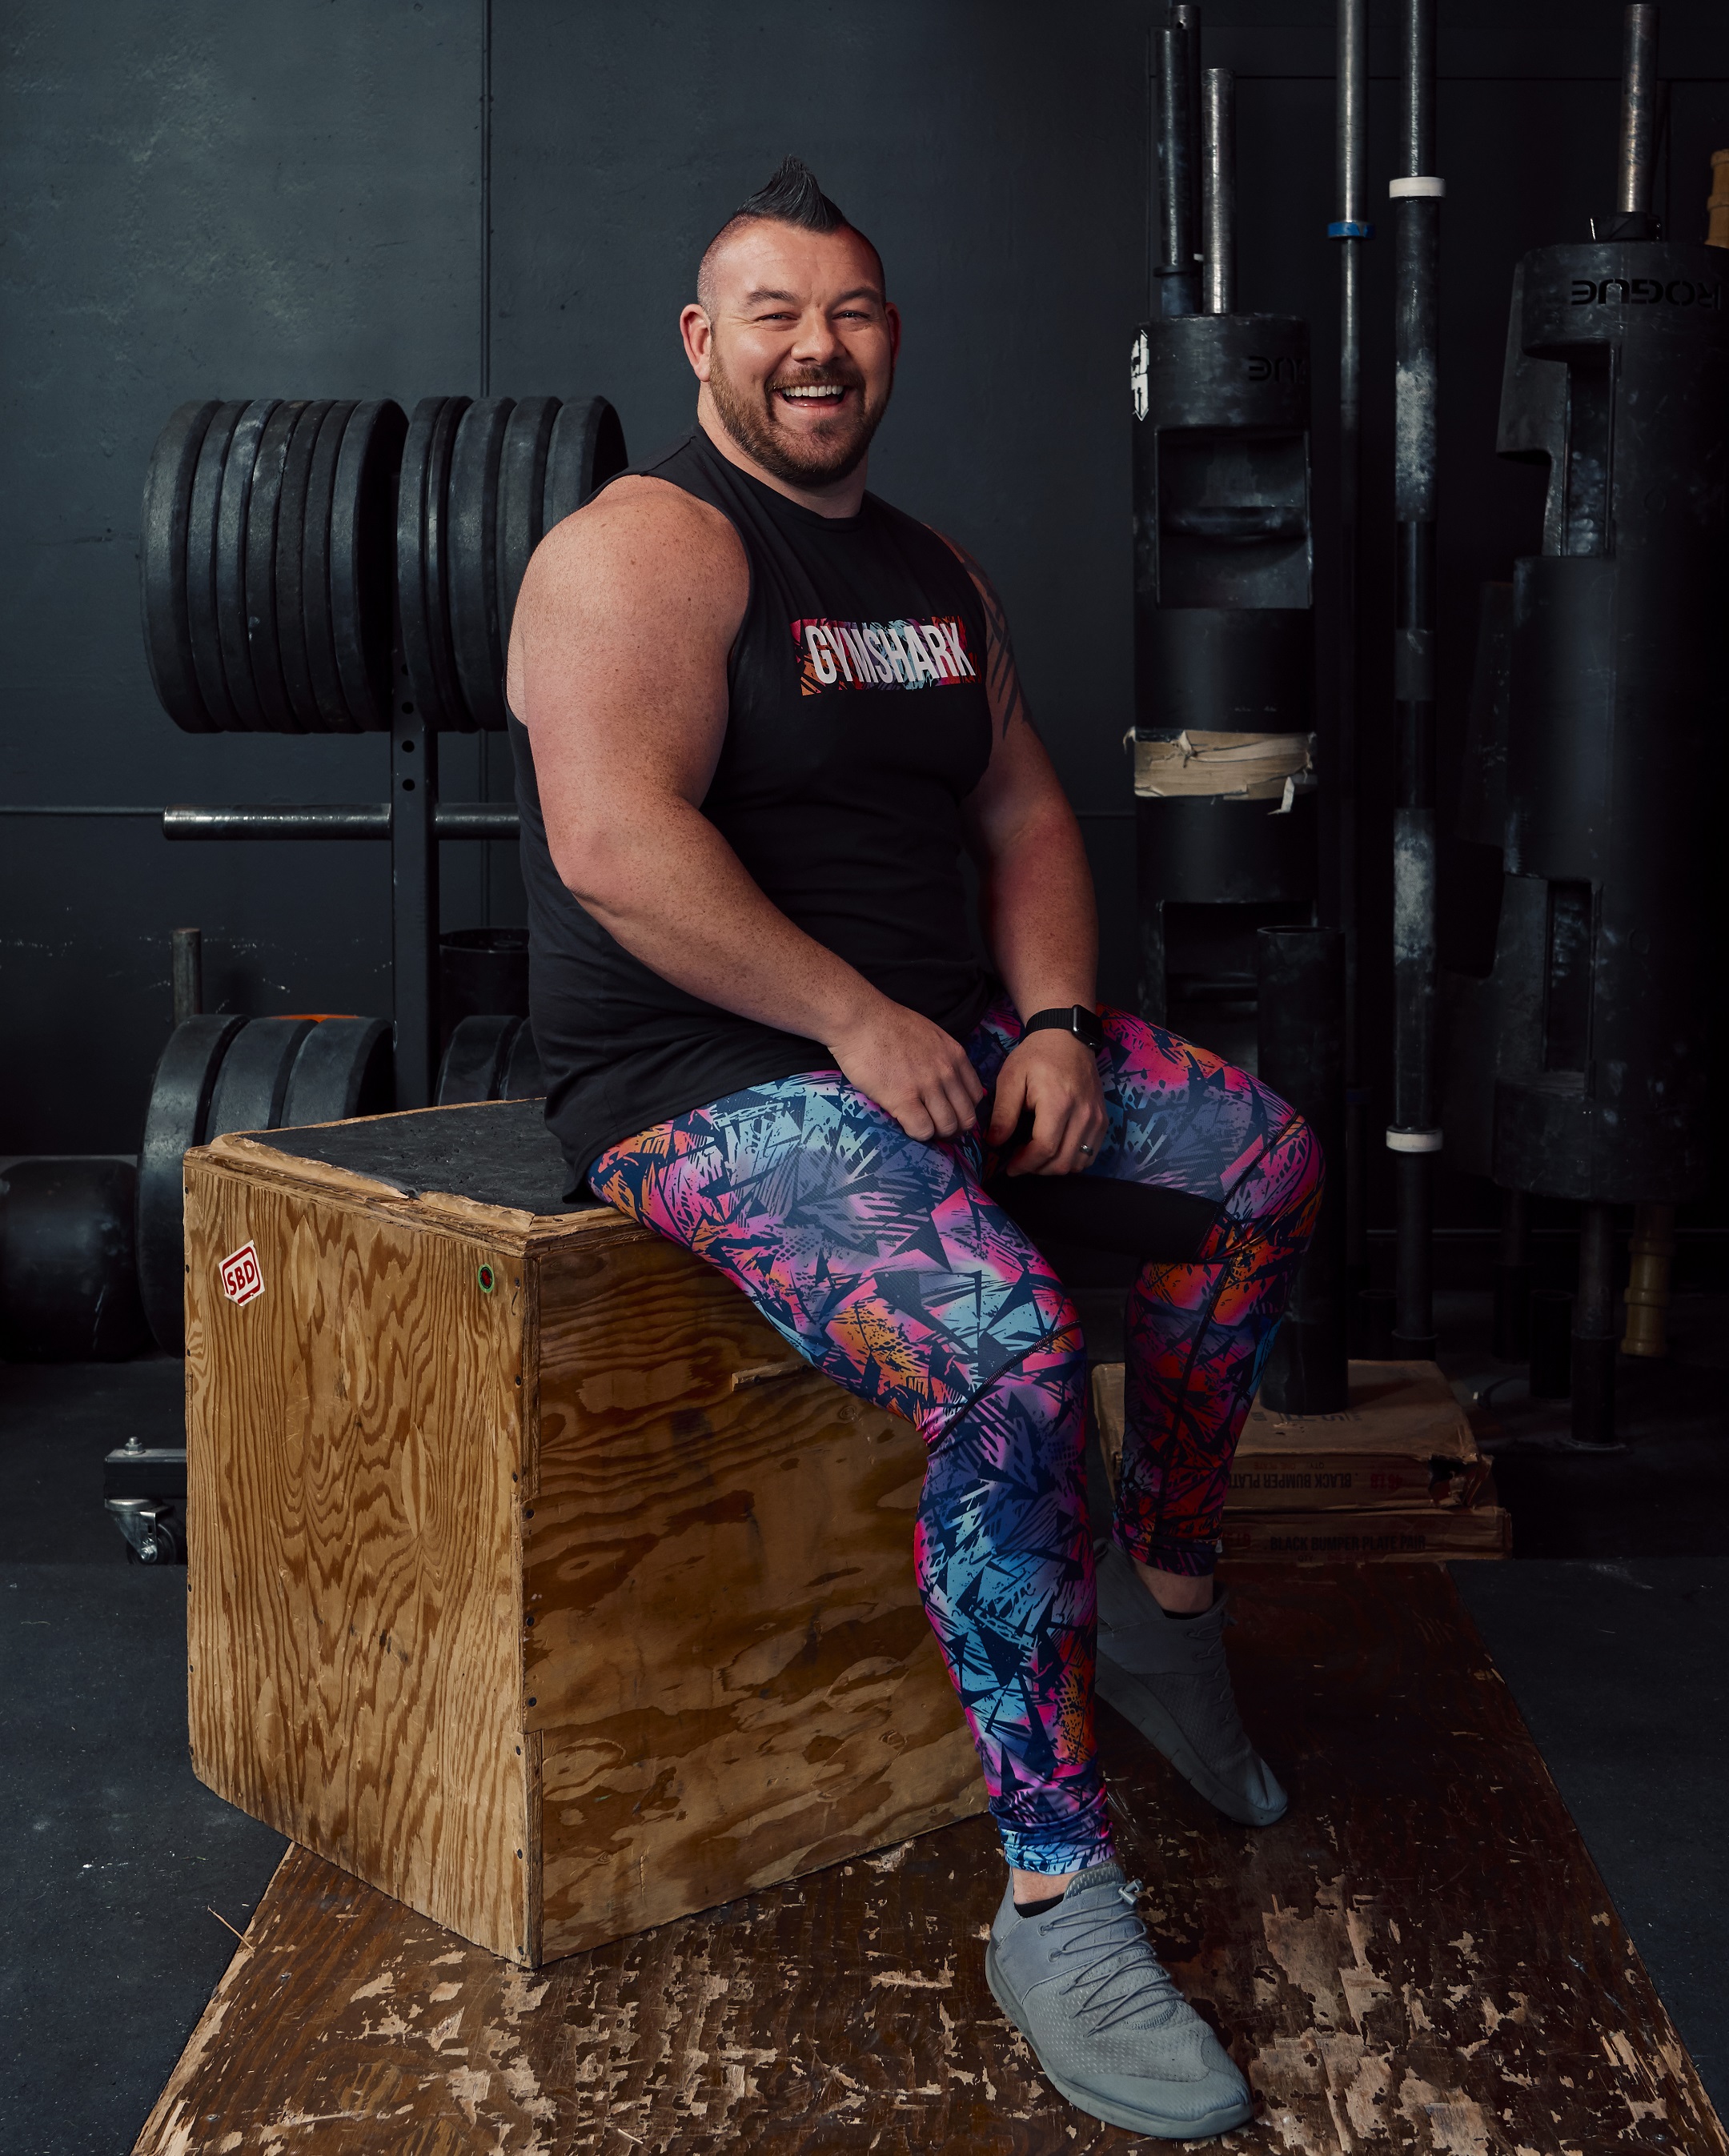 The World's Strongest Gay - The OUT Foundation